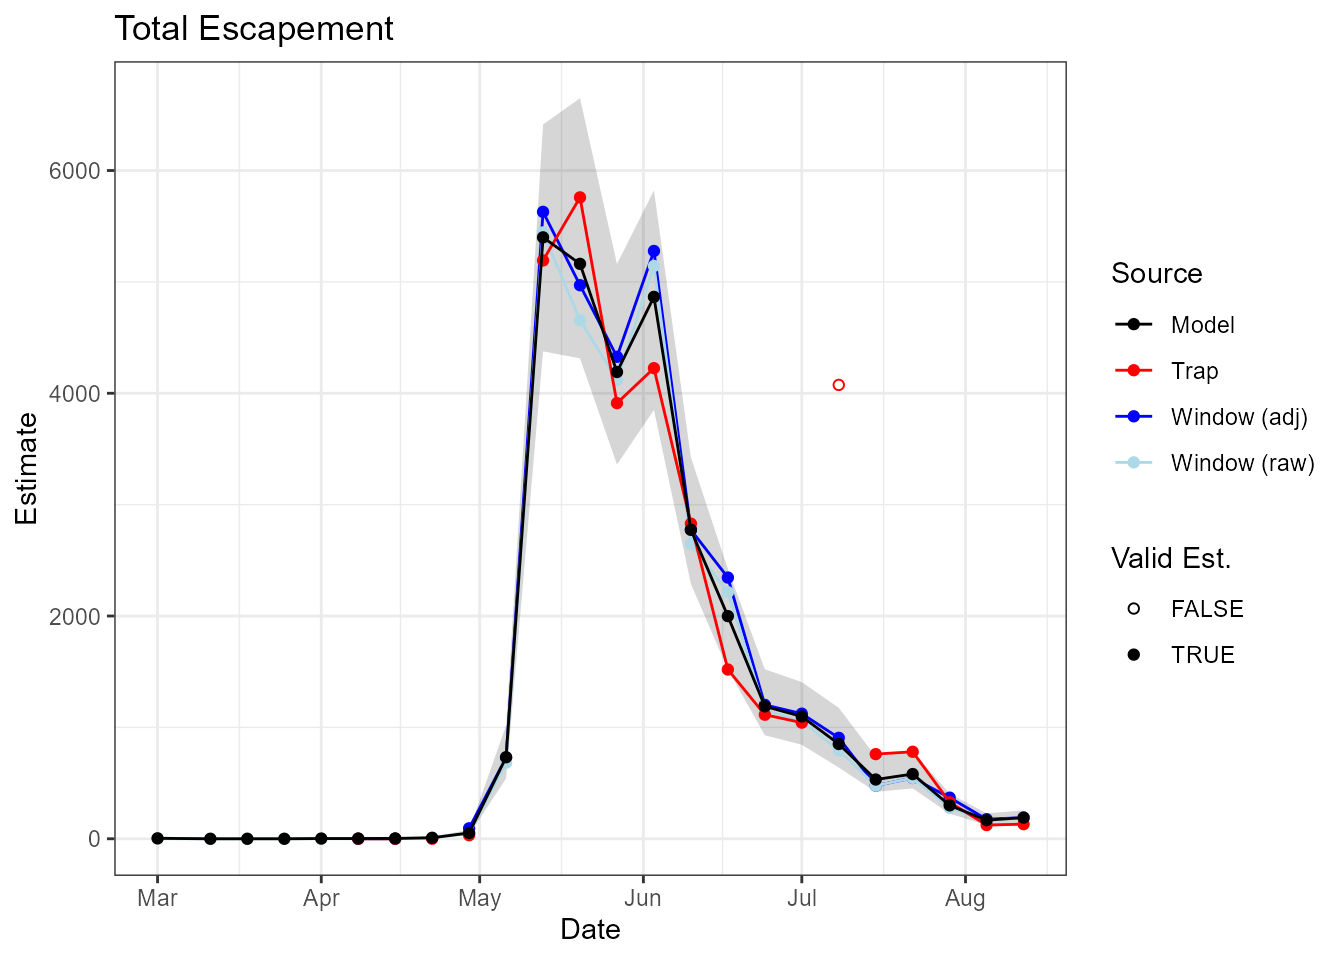 Time-series plot showing estimates of total escapement for Chinook in 2019, including raw window counts, window counts adjusted for nighttime passage, trap estimates and STADEM estimates.